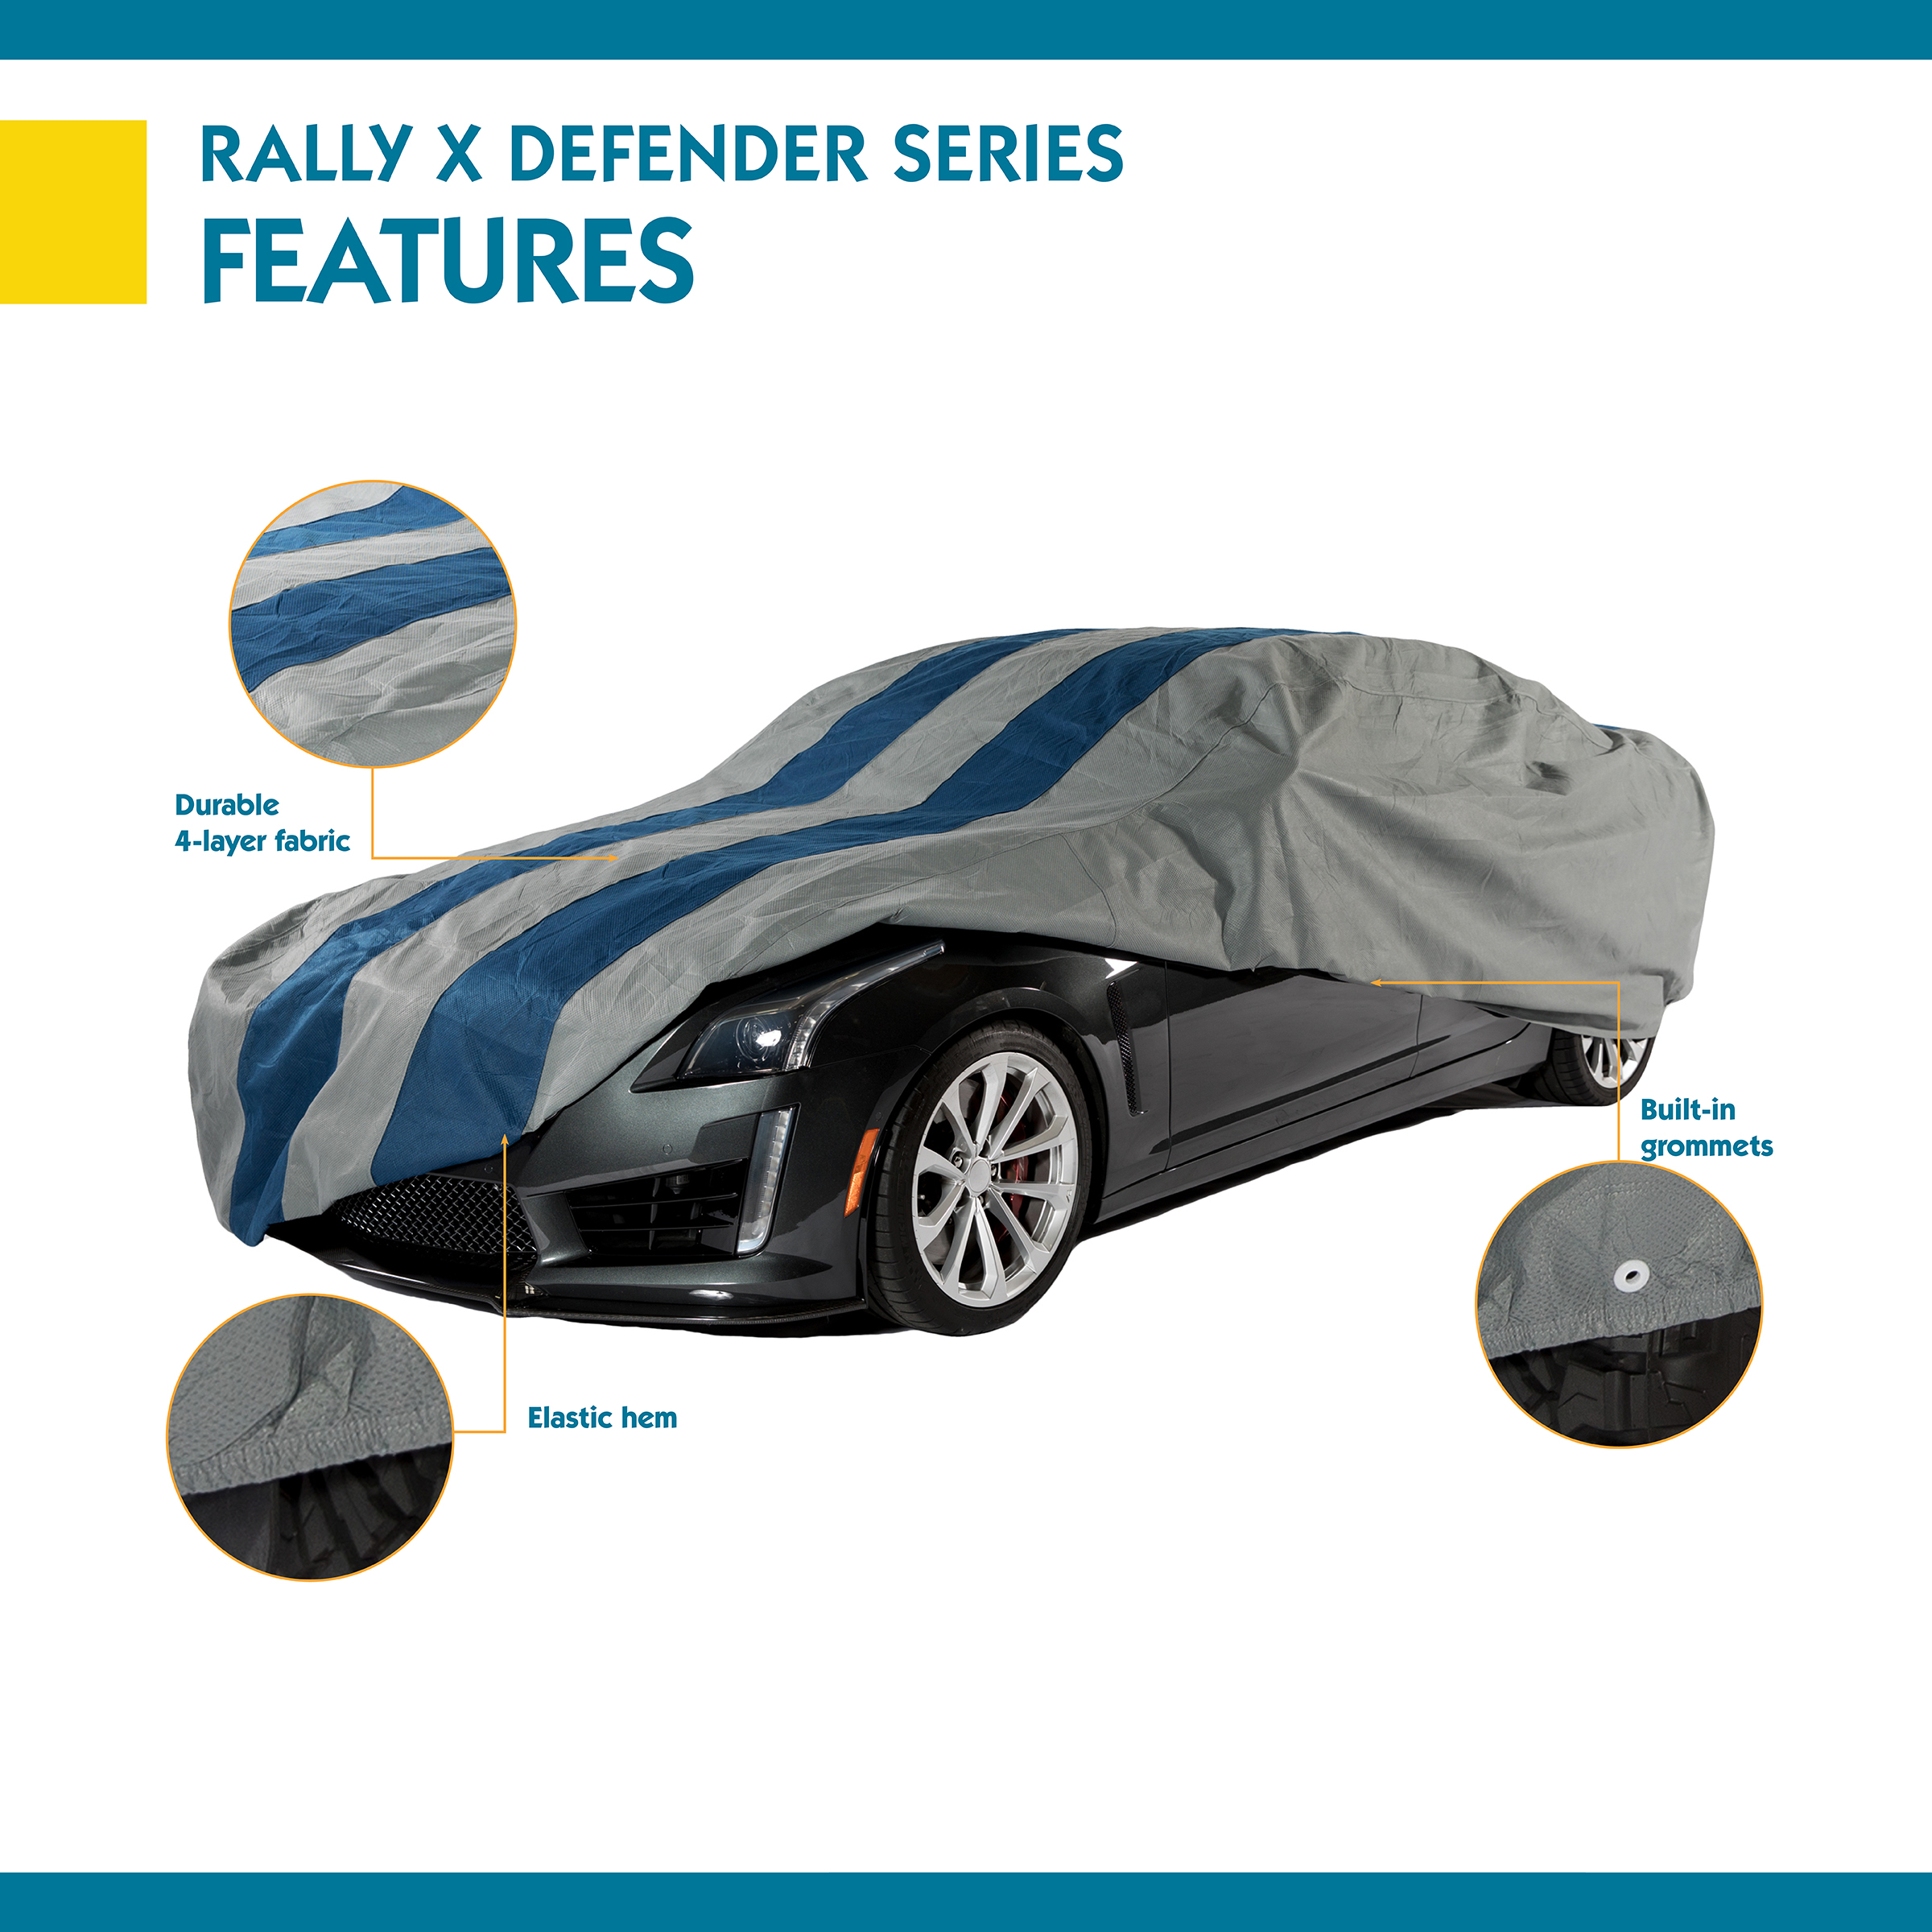 Duck Covers Rally X Defender Car Cover, Fits Sedans up to 13 ft. in. L 